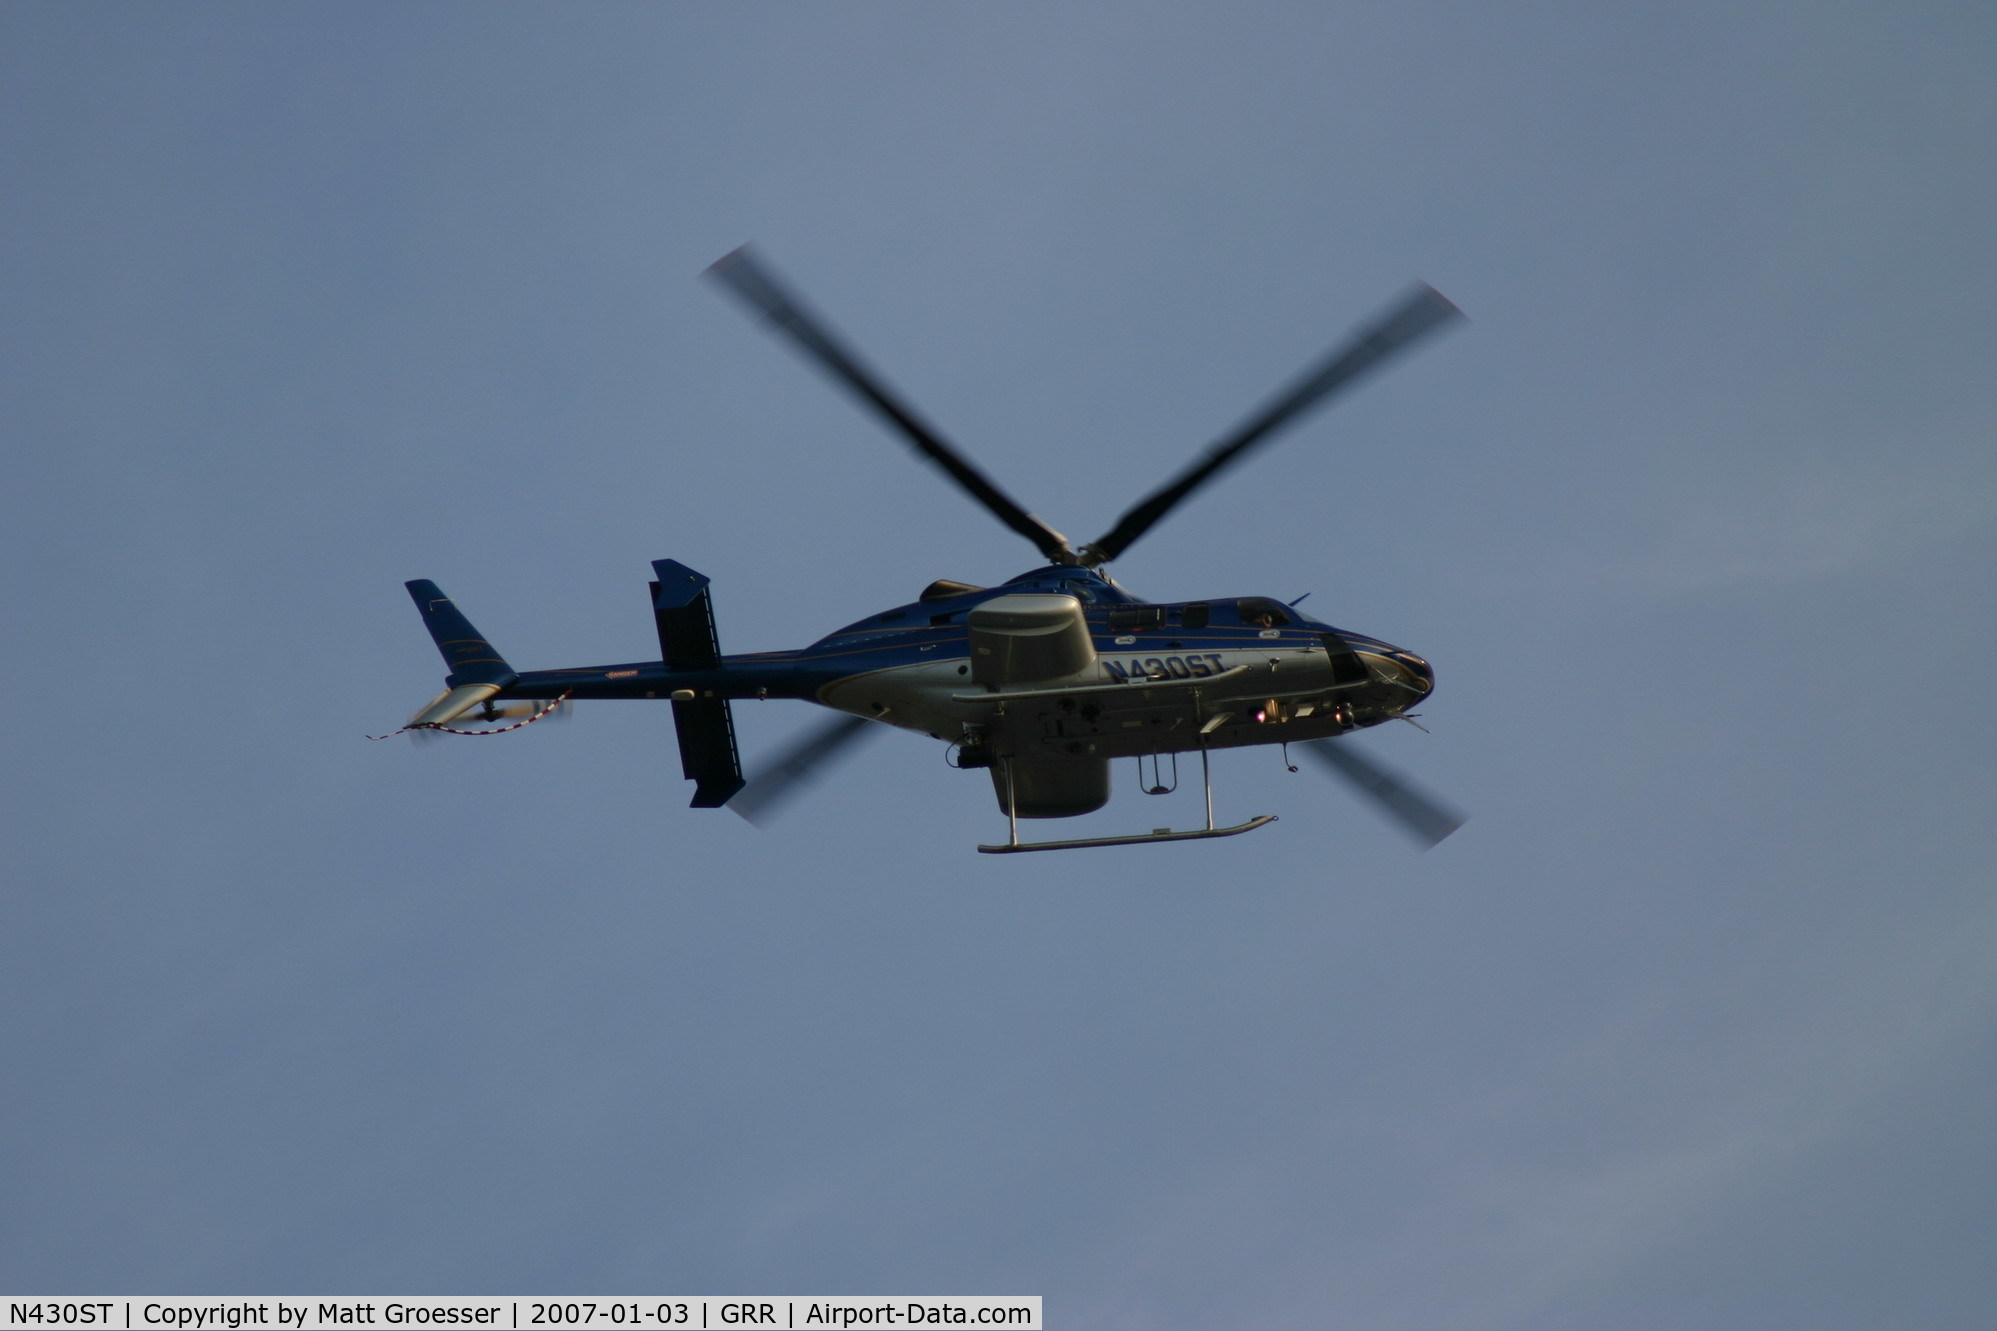 N430ST, 2000 Bell 430 C/N 49071, MSP helicopter over Grand Rapids for Gerald R. Ford funeral security detail